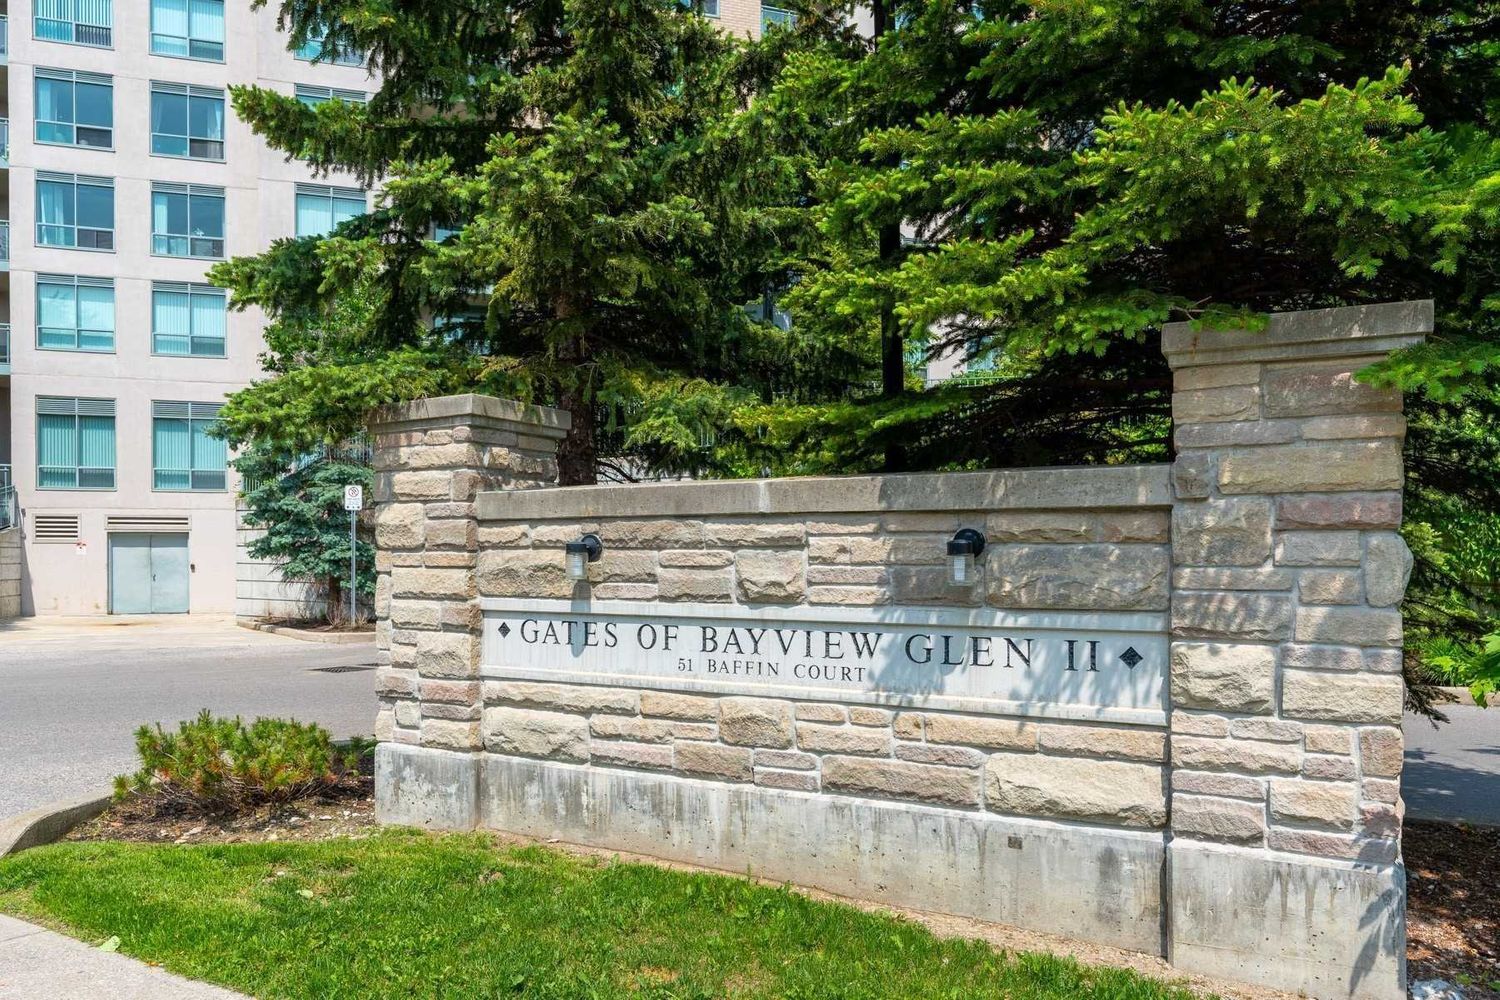 51 Baffin Court. The Gates of Bayview Glen II Condos is located in  Richmond Hill, Toronto - image #3 of 3